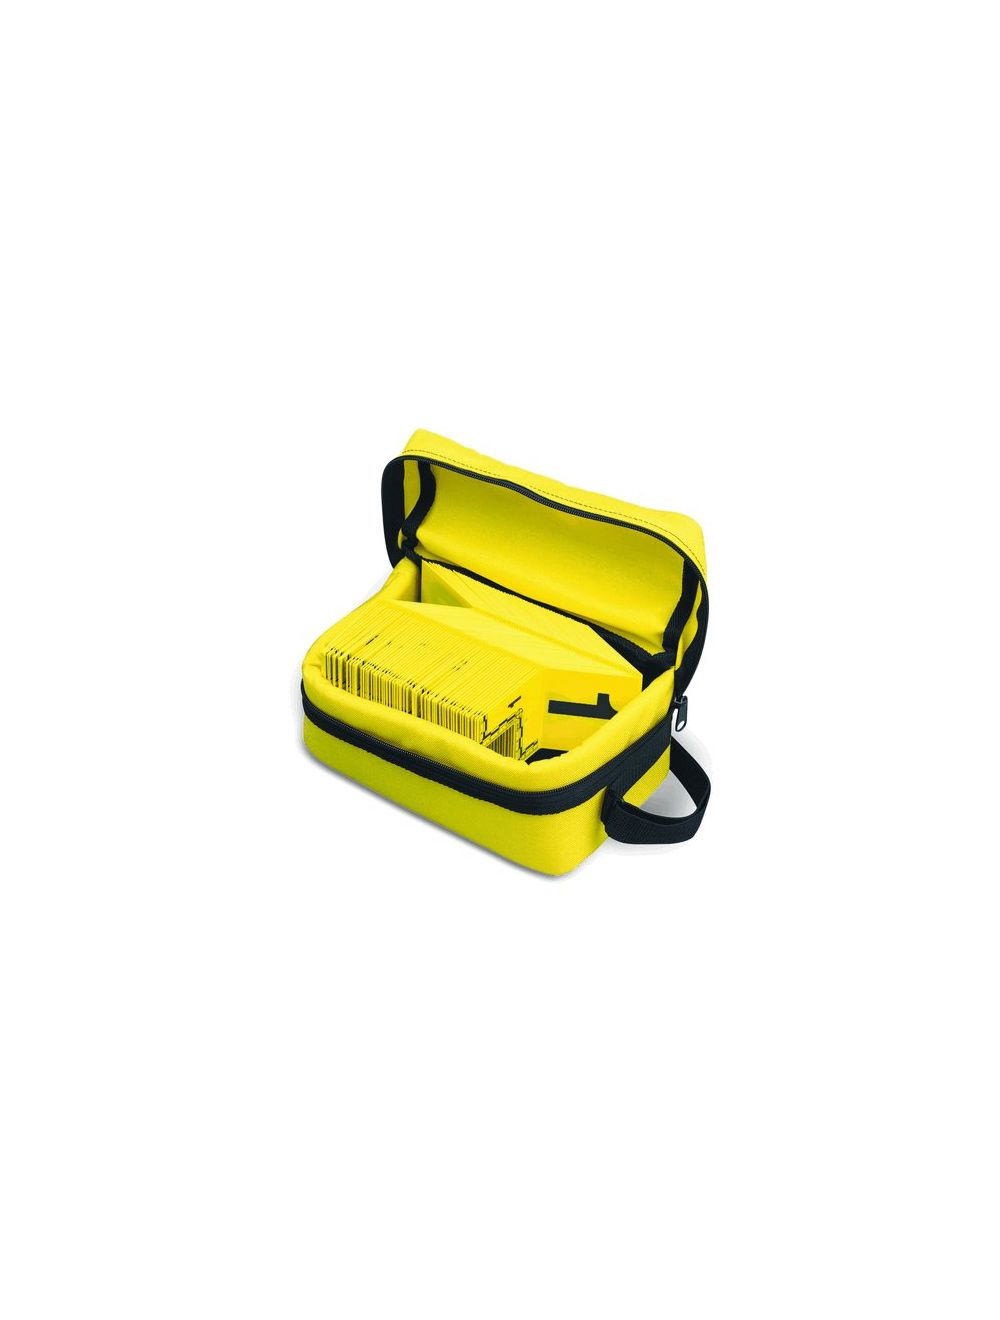 ID Marker Carrying Case